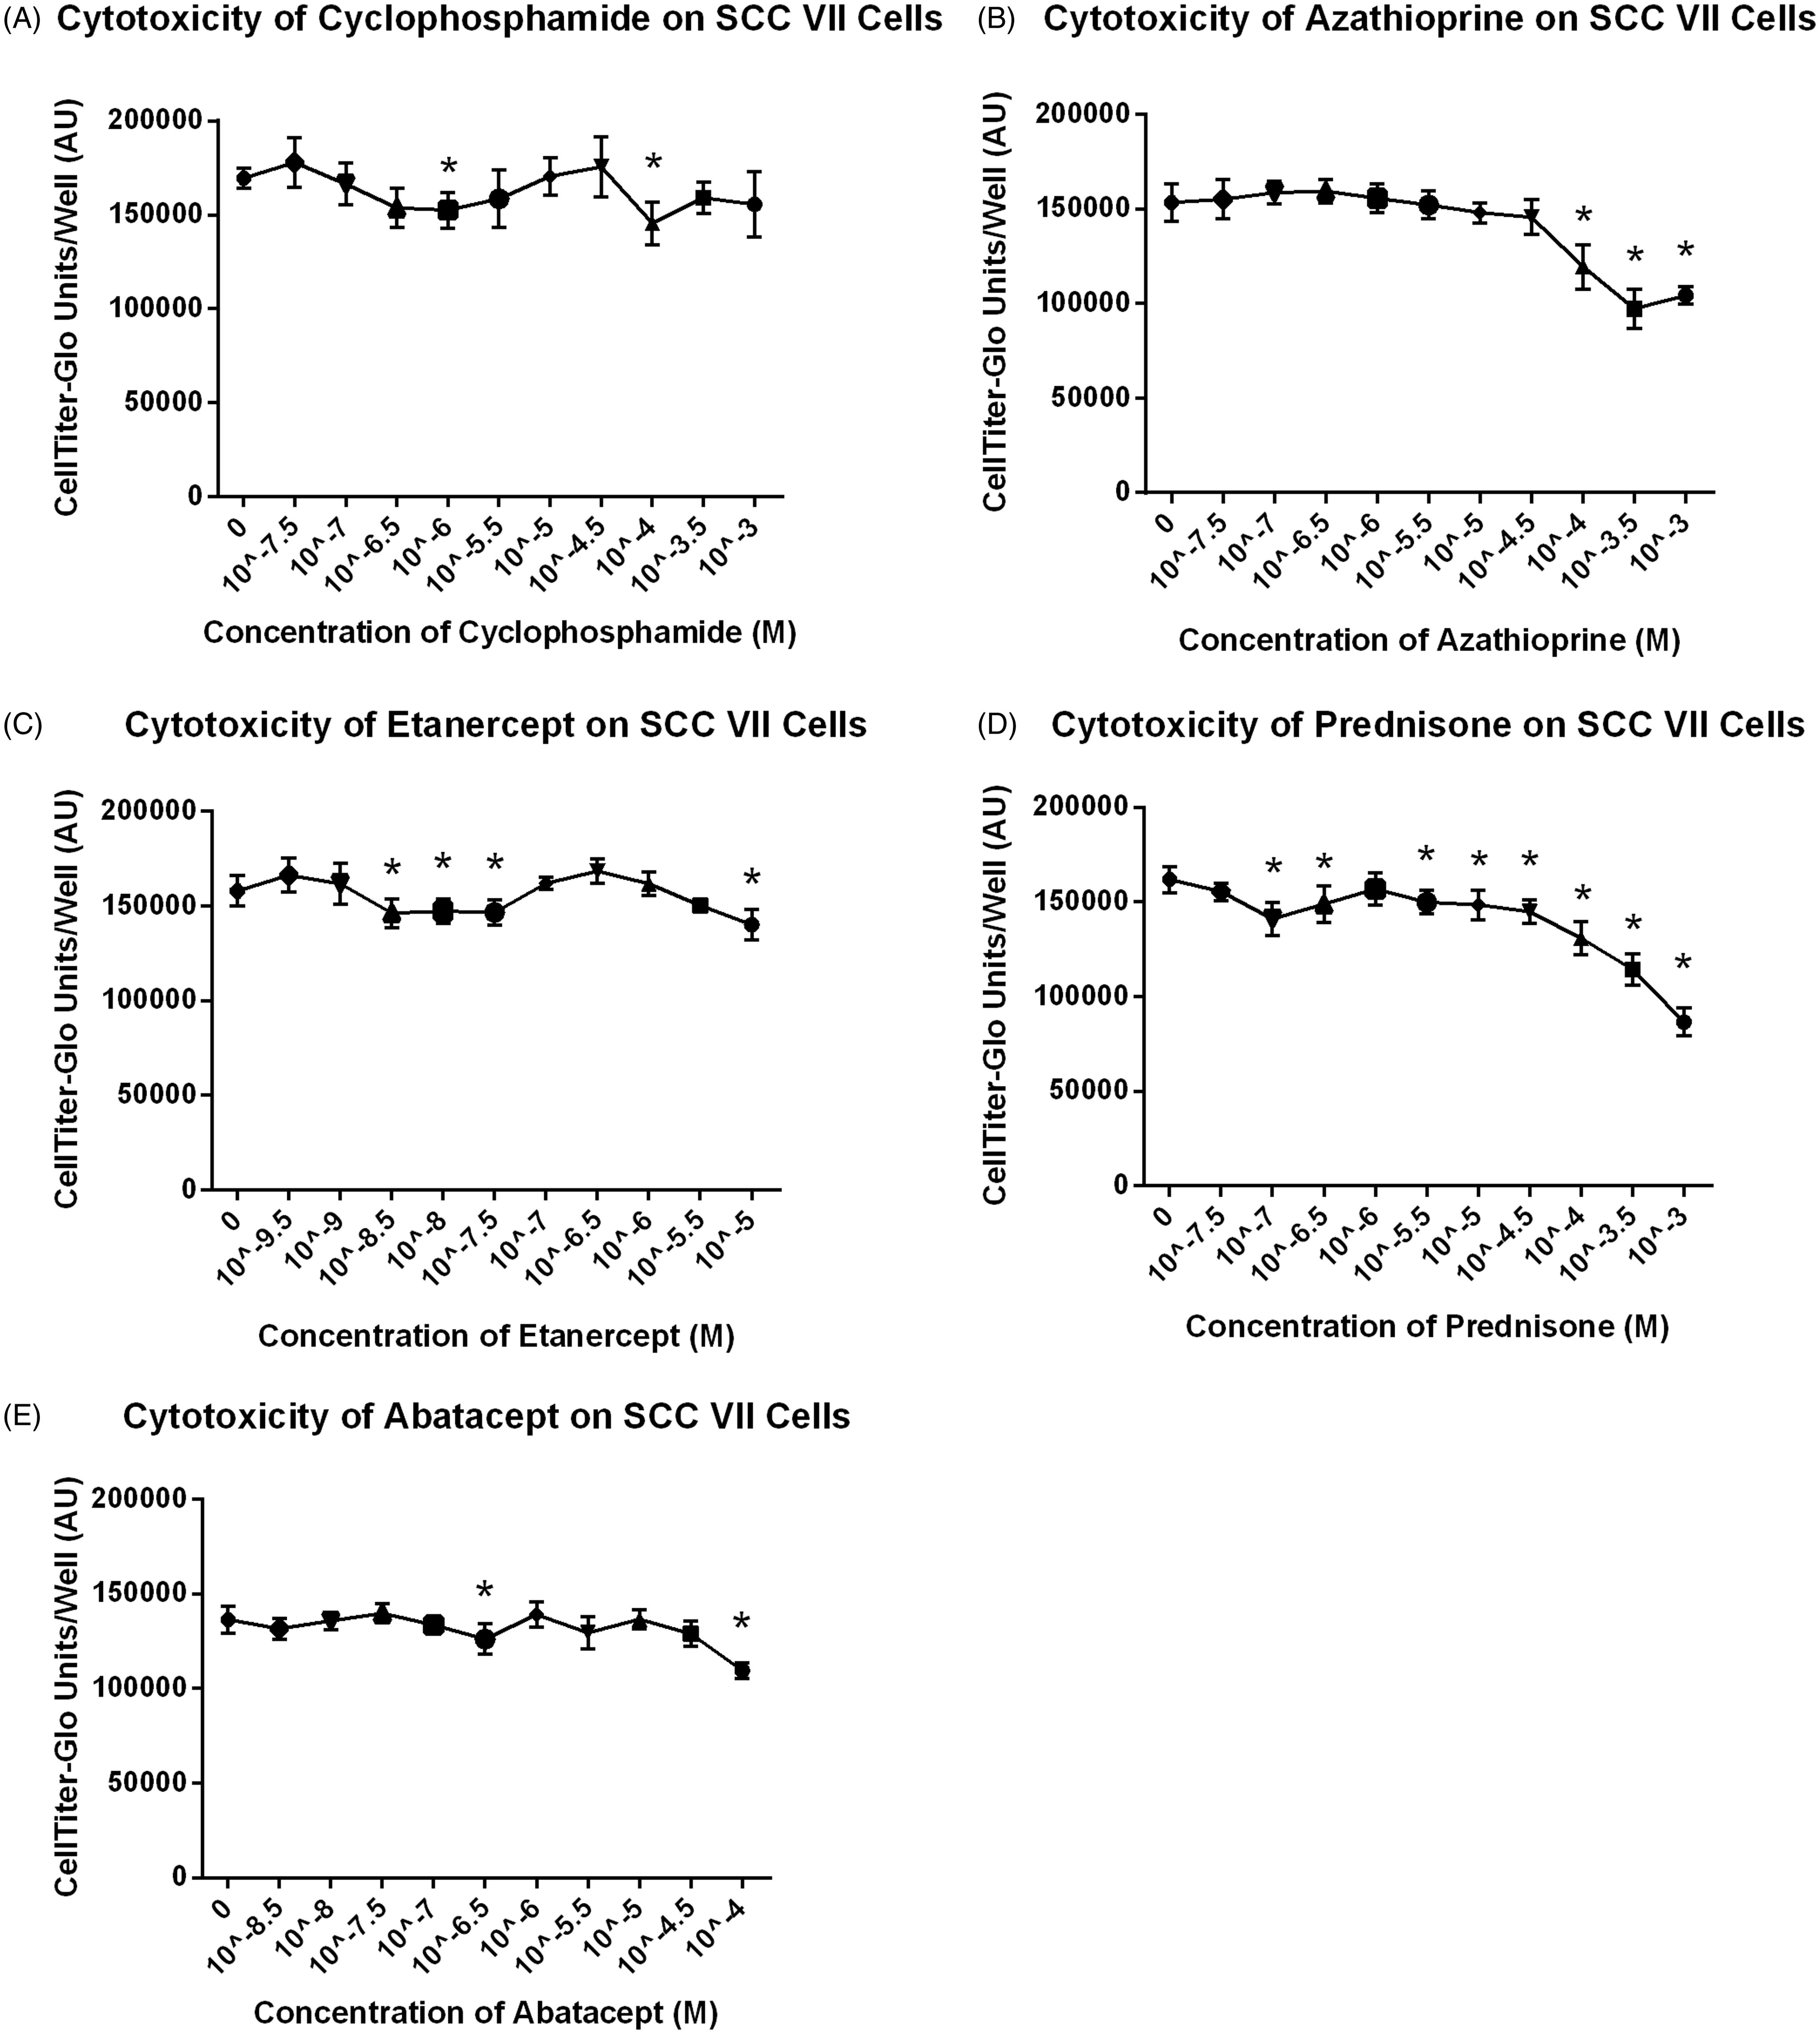 Figure 1. Drug effects on SCC VII cells in vitro. Azathioprine and Prednisone show dose responsive effects on SCC VII cells in vitro at high concentrations. Data shown are mean ± SD. * Cell count was significantly less than control (p < 0.05).